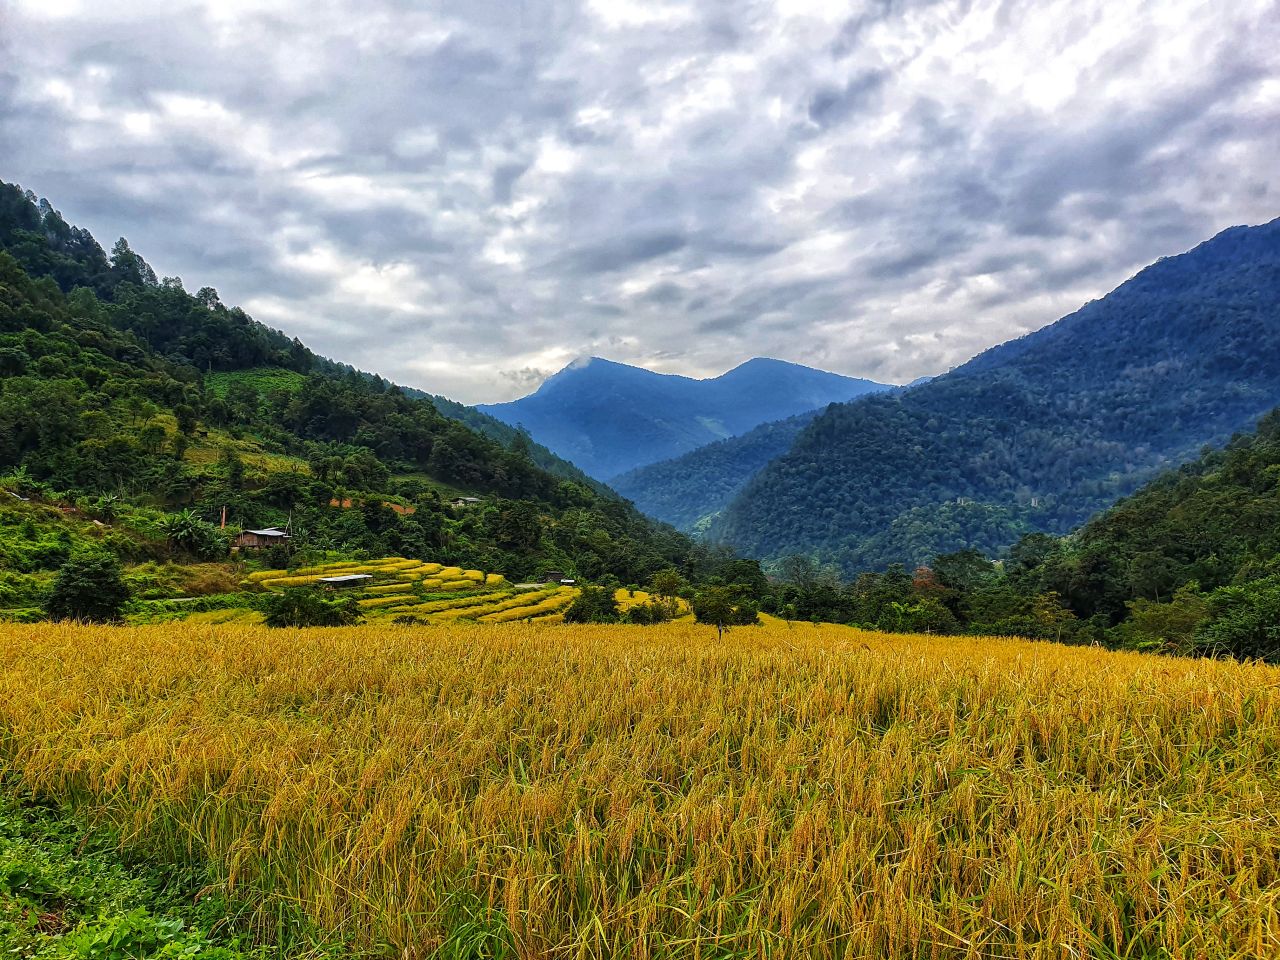 <strong>Trans Bhutan Trail:</strong> A former Buddhist pilgrimage route connecting sites in Bhutan and Tibet, this 250-mile path has reopened to tourists. Click through for more photos.